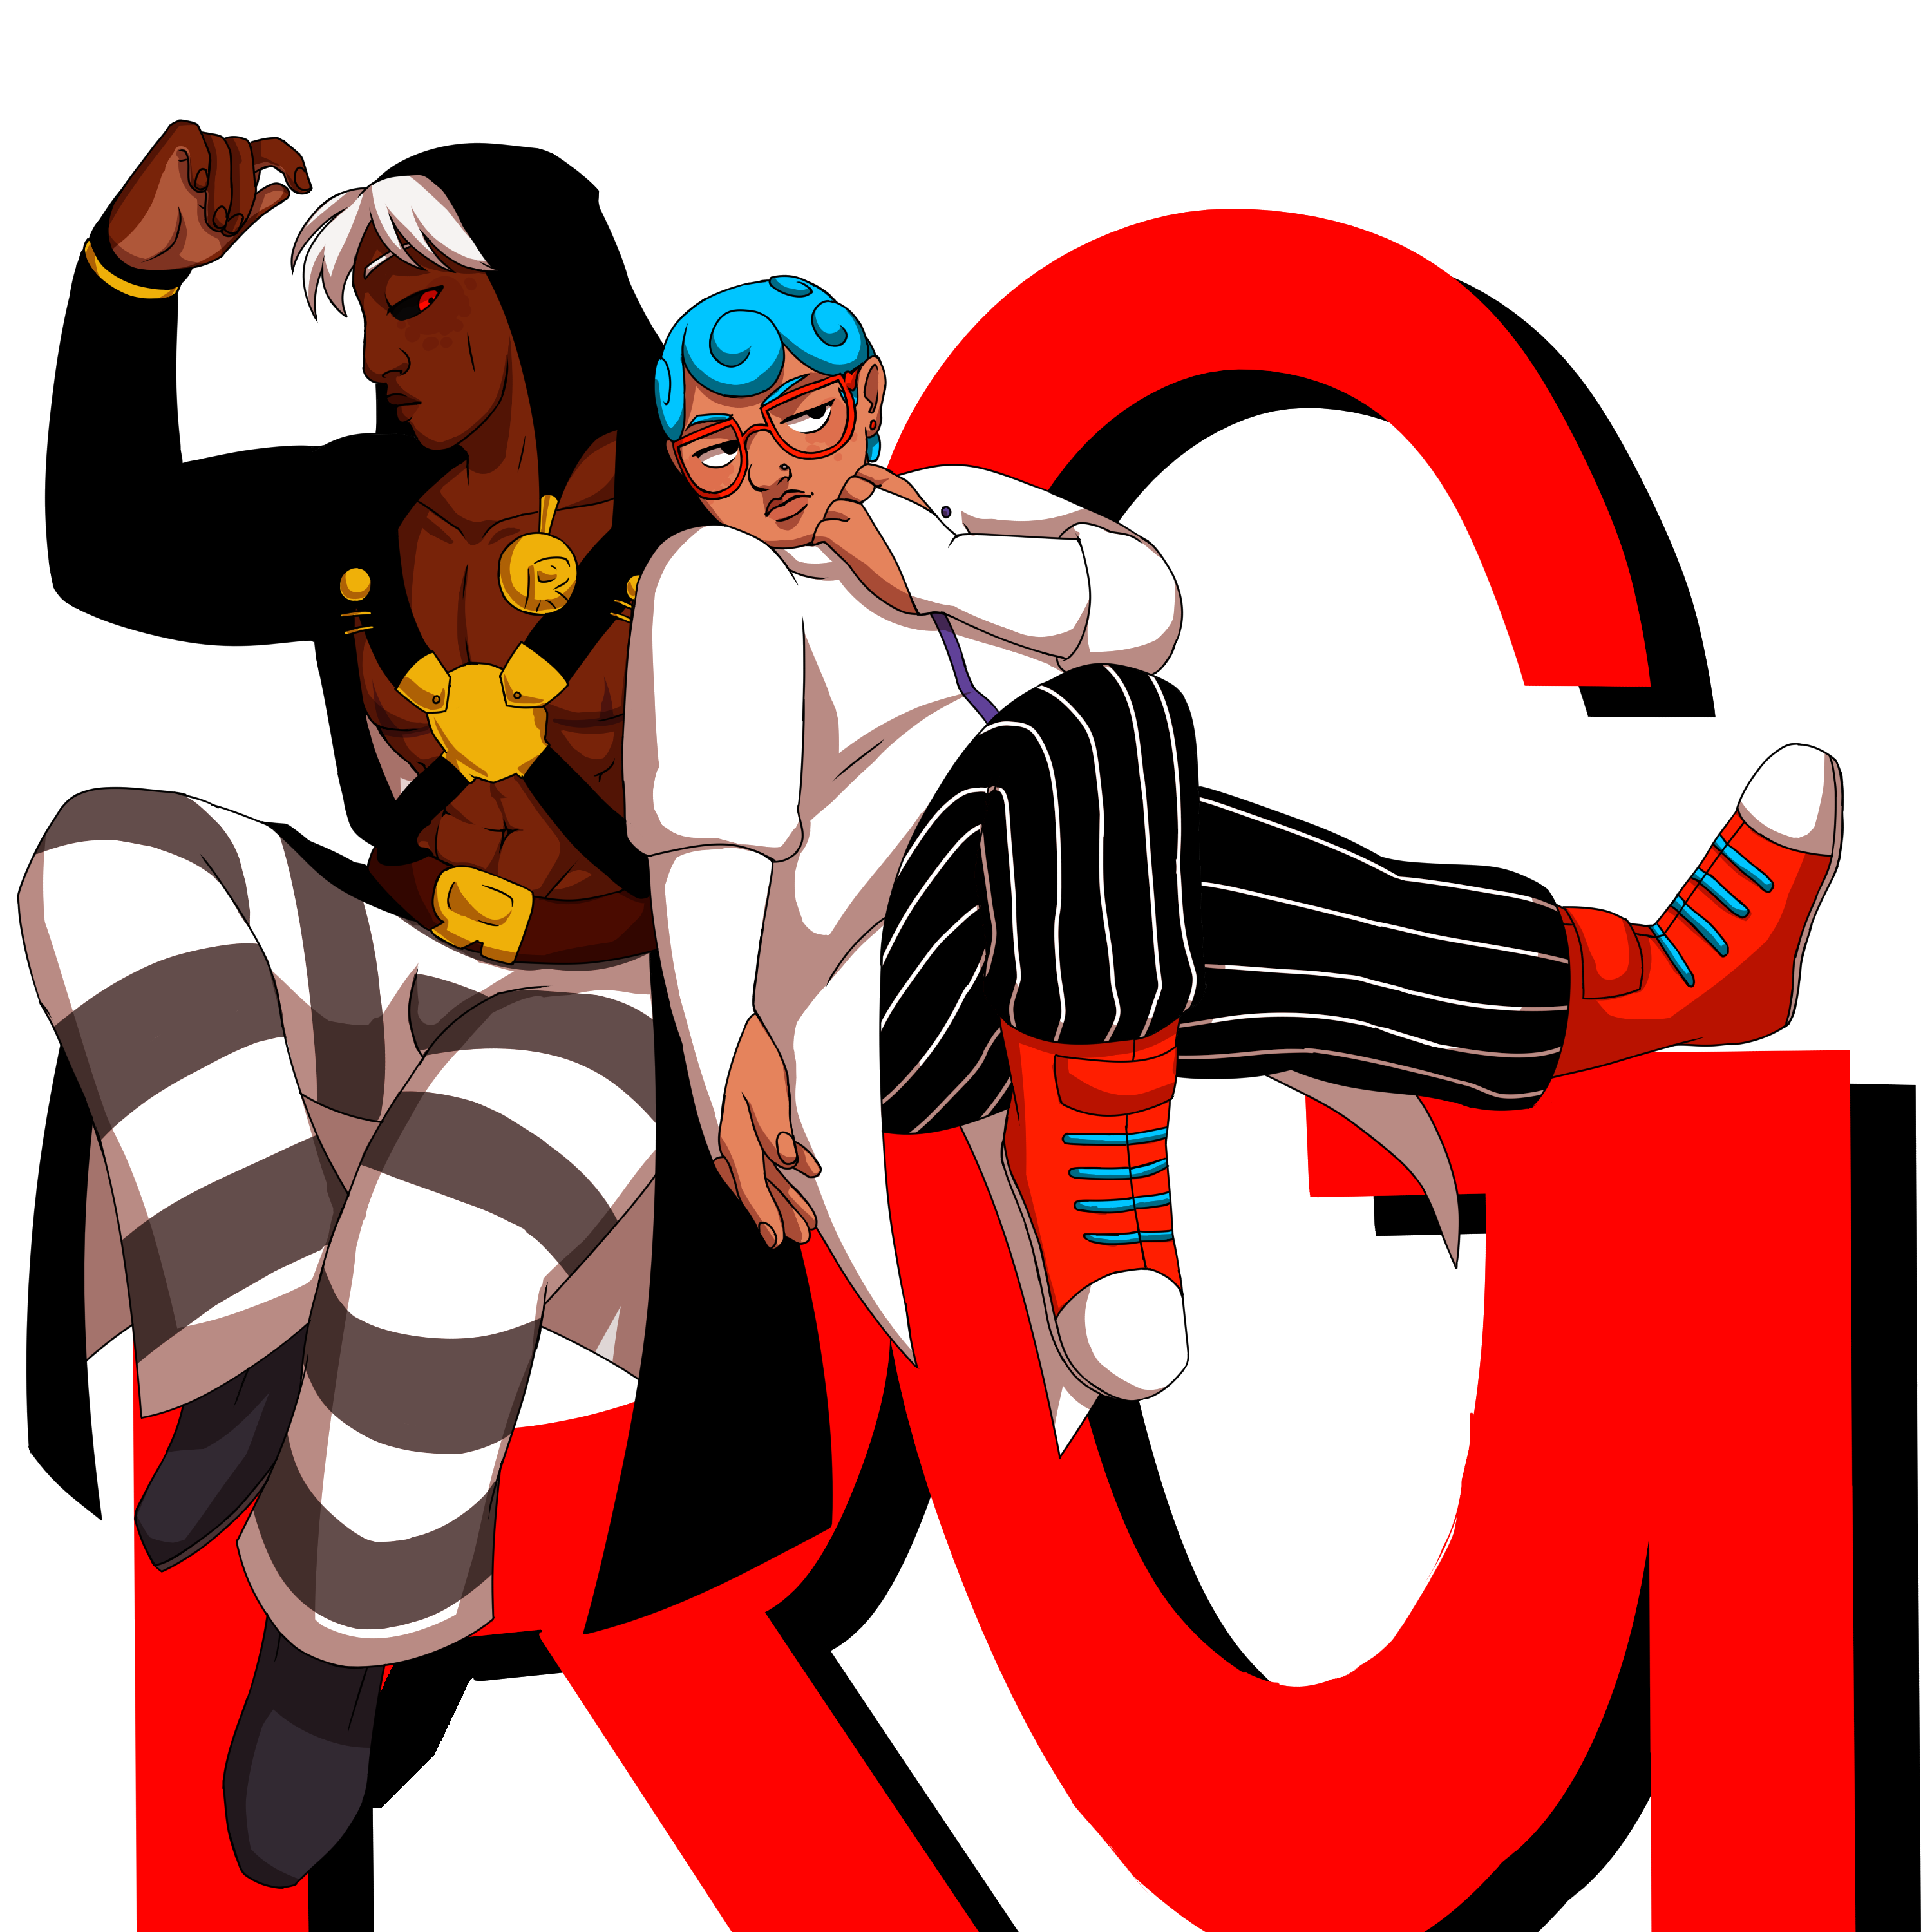 a drawing of Risotto Nero and Ghiaccio. The two are sitting next to each other, posing relaxedly. Ghiaccio is leaning on Risotto's shoulder. In the background are a large R and G, in red with a black drop shadow, looking as though the two are sitting on the letters. The background is otherwise transparent.